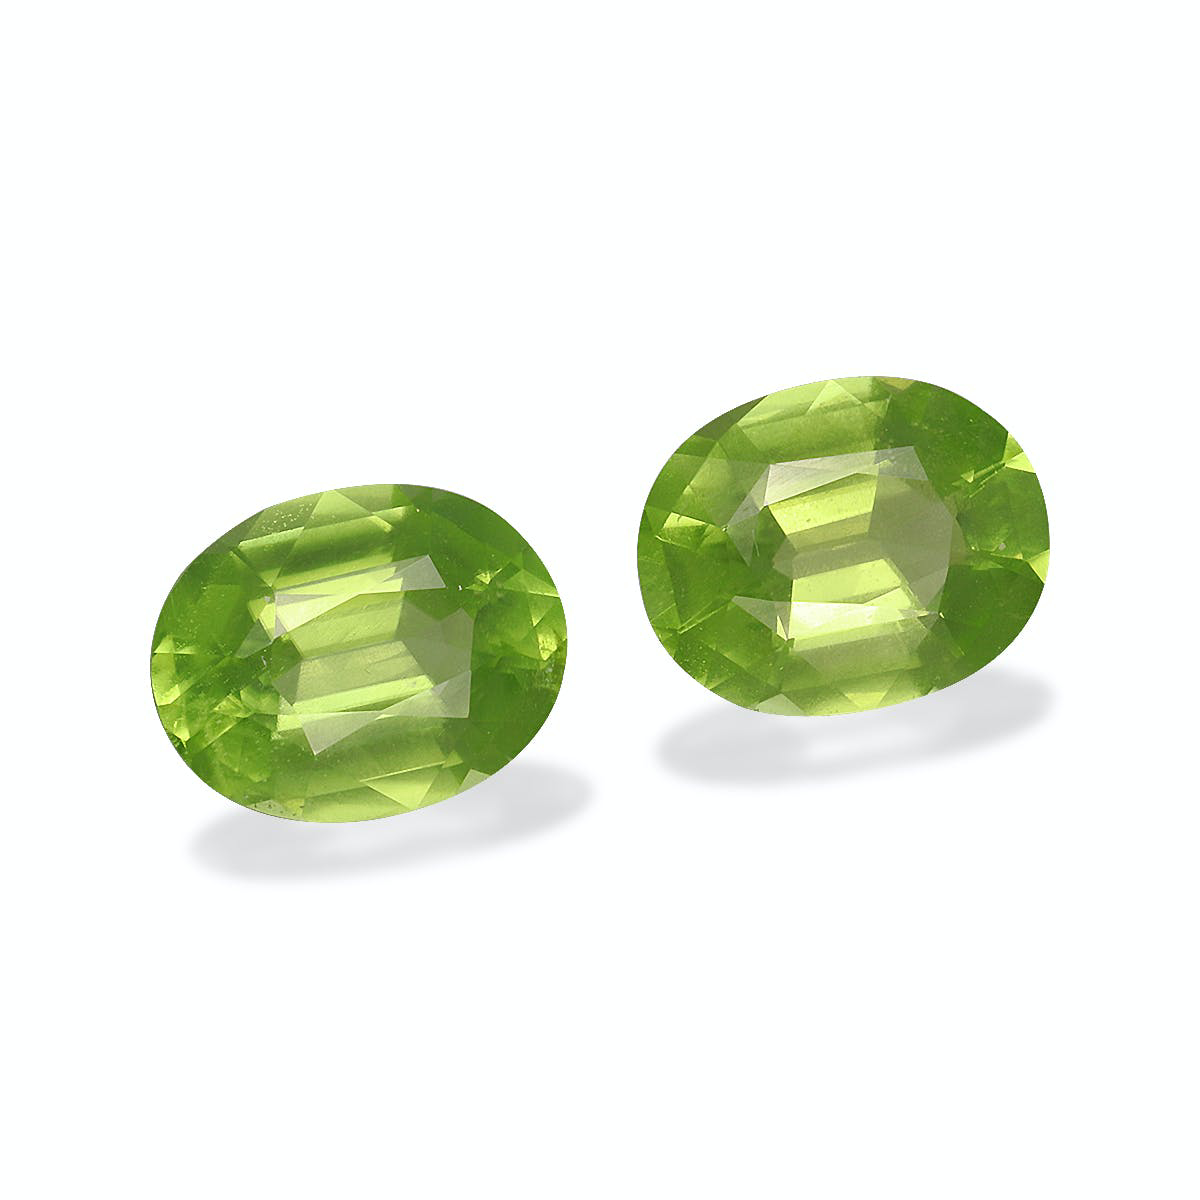 Picture of Lime Green Peridot 5.20ct - 10x8mm Pair (PD0149)